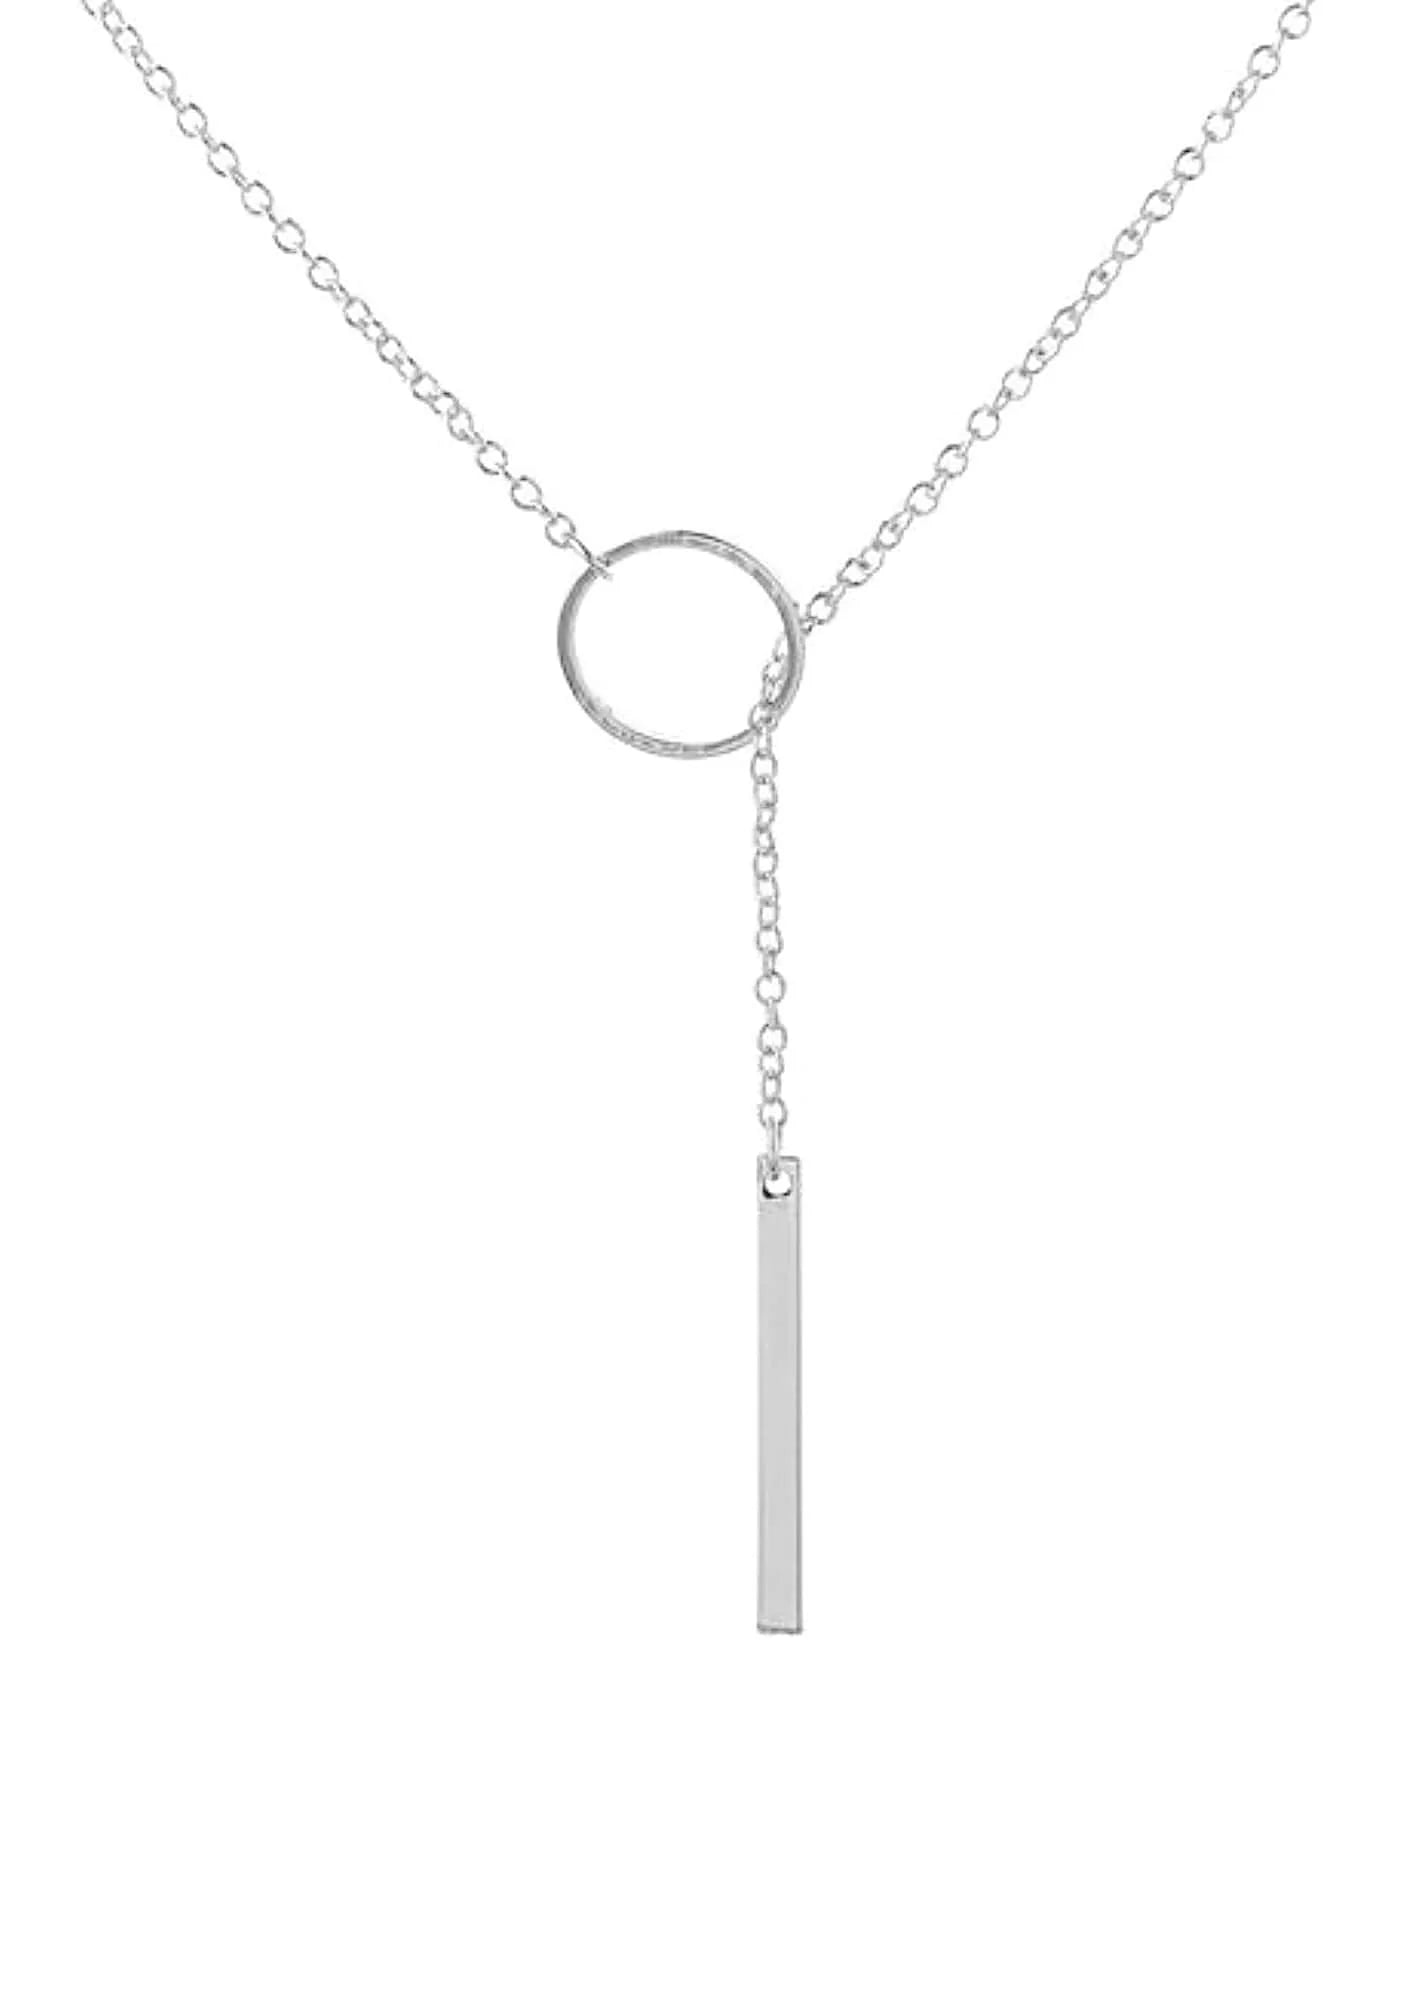 SILVER Y-SHAPED LONG CHAIN NECKLACE